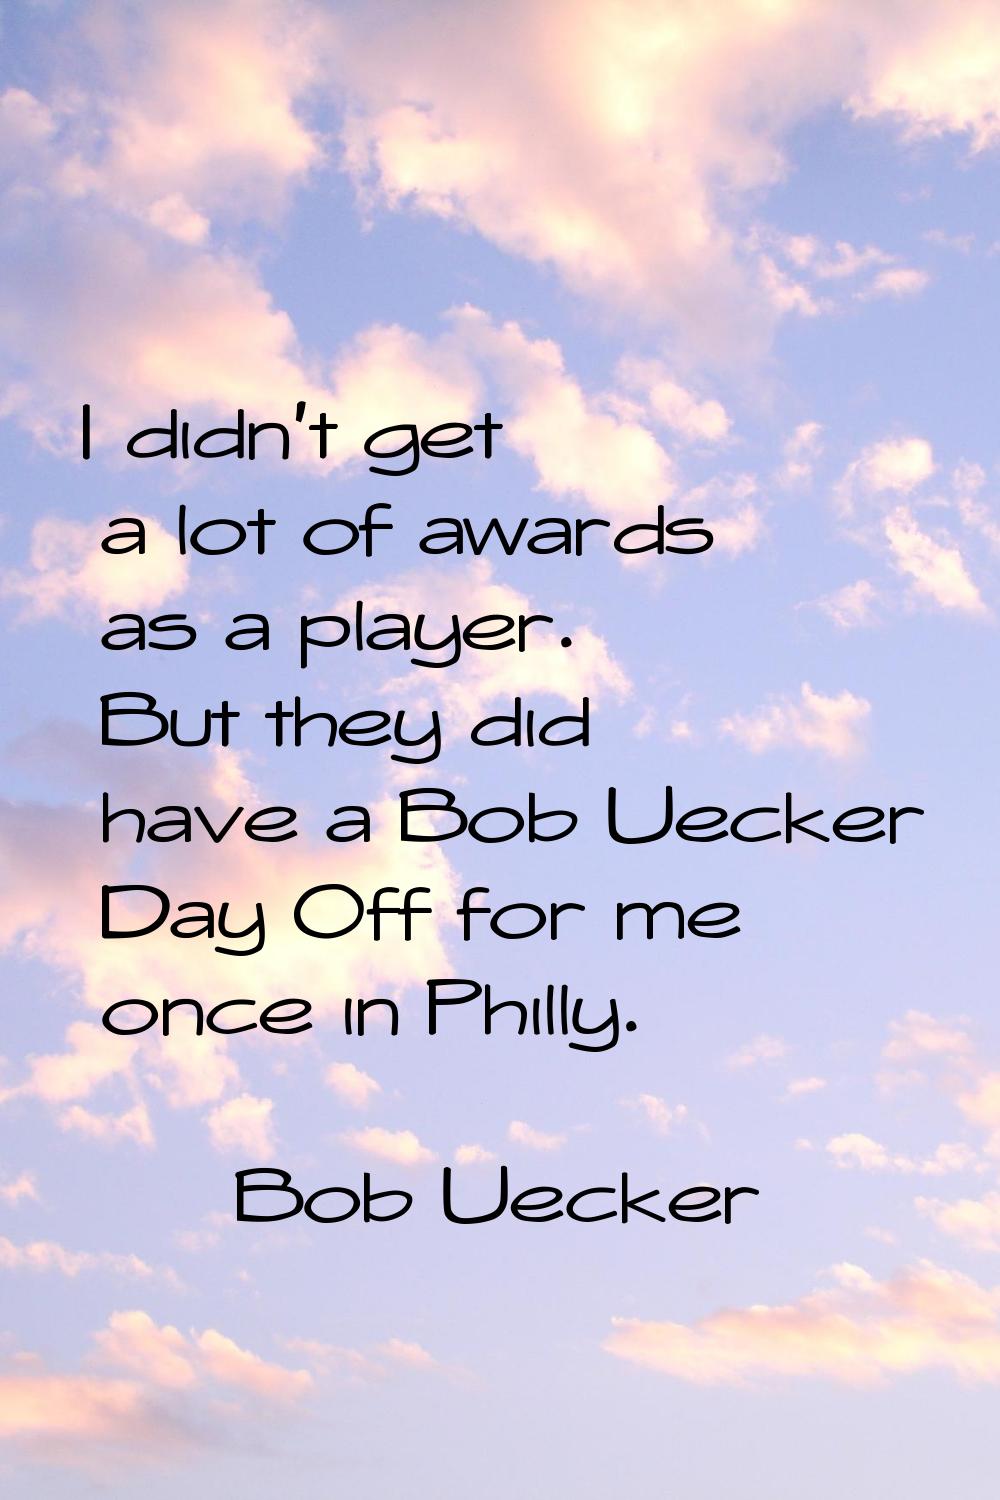 I didn't get a lot of awards as a player. But they did have a Bob Uecker Day Off for me once in Phi